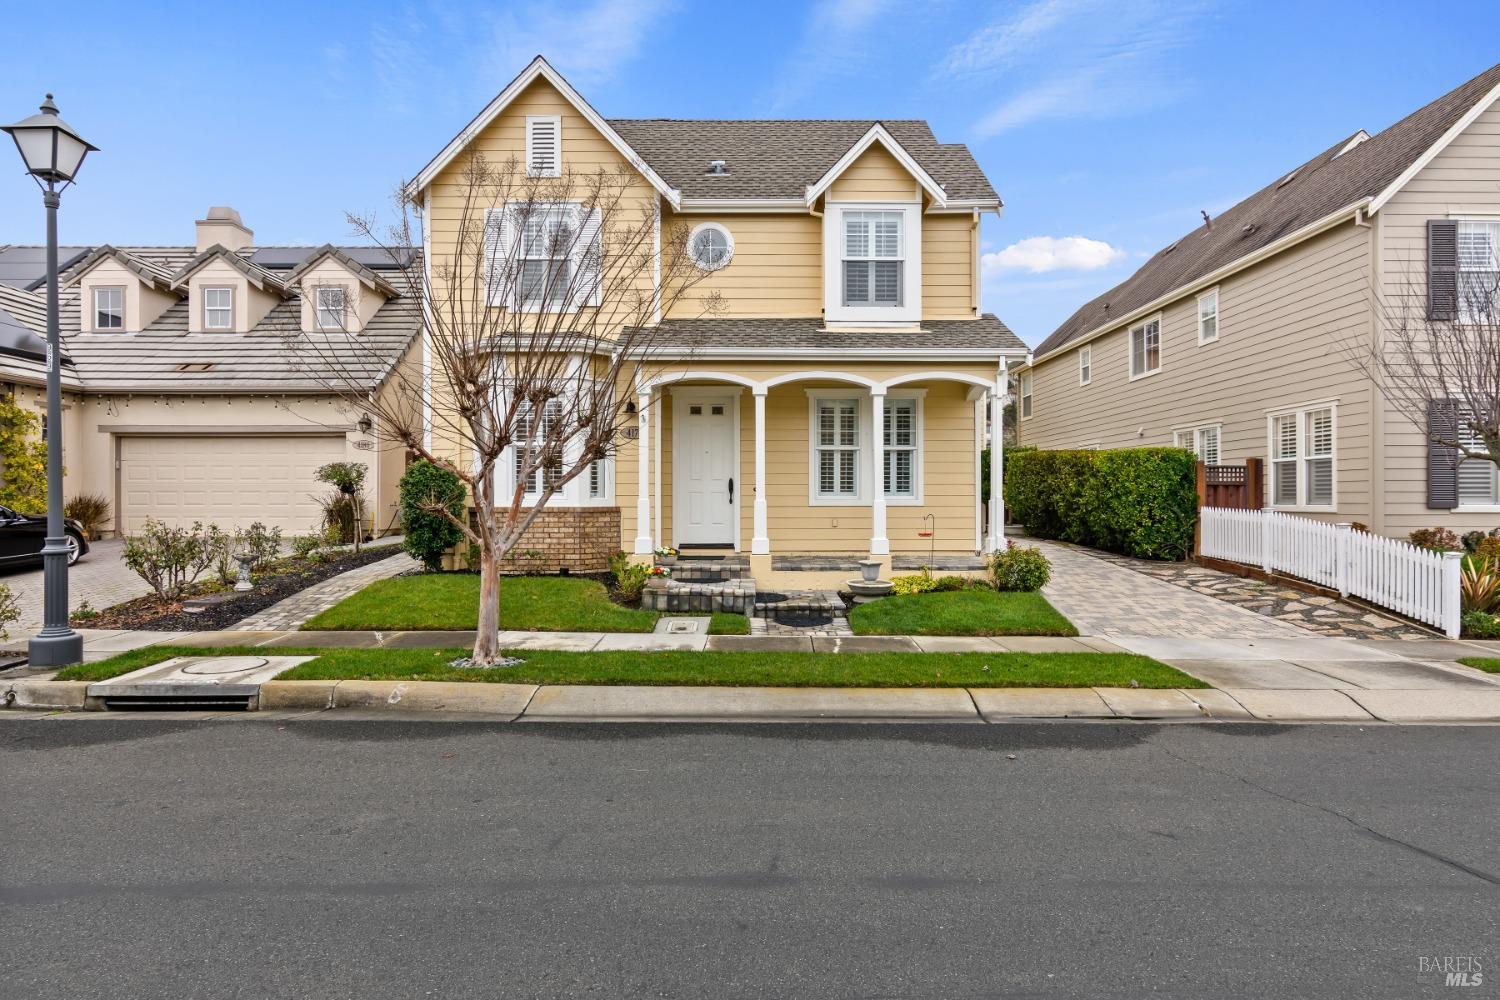 Photo of 4176 Summer Gate Ave in Vallejo, CA